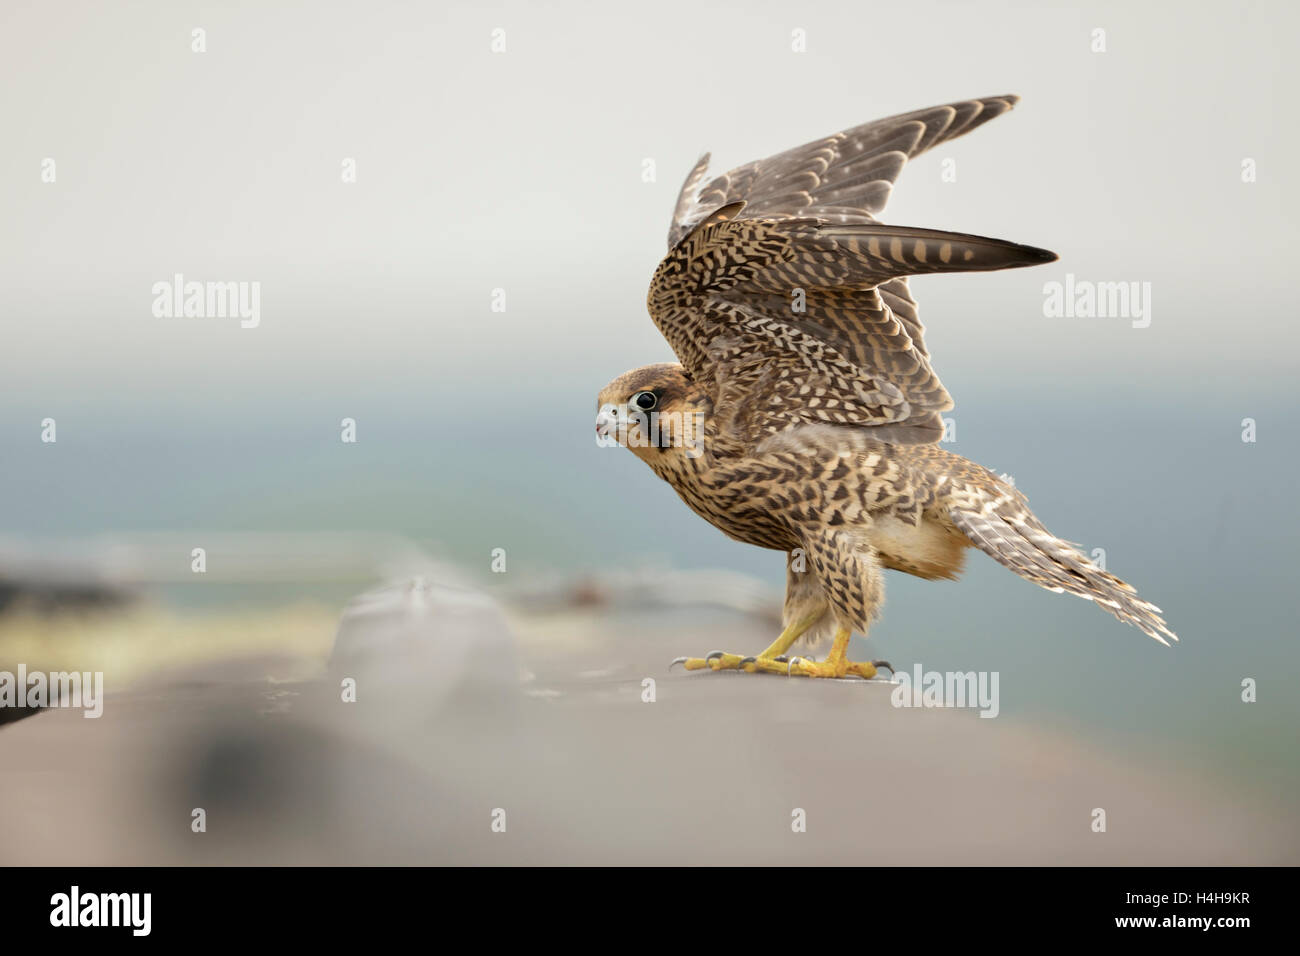 Eurasian Duck Hawk ( Falco peregrinus ), young bird of prey at the edge of a roof on top of a building, beating with its wings. Stock Photo